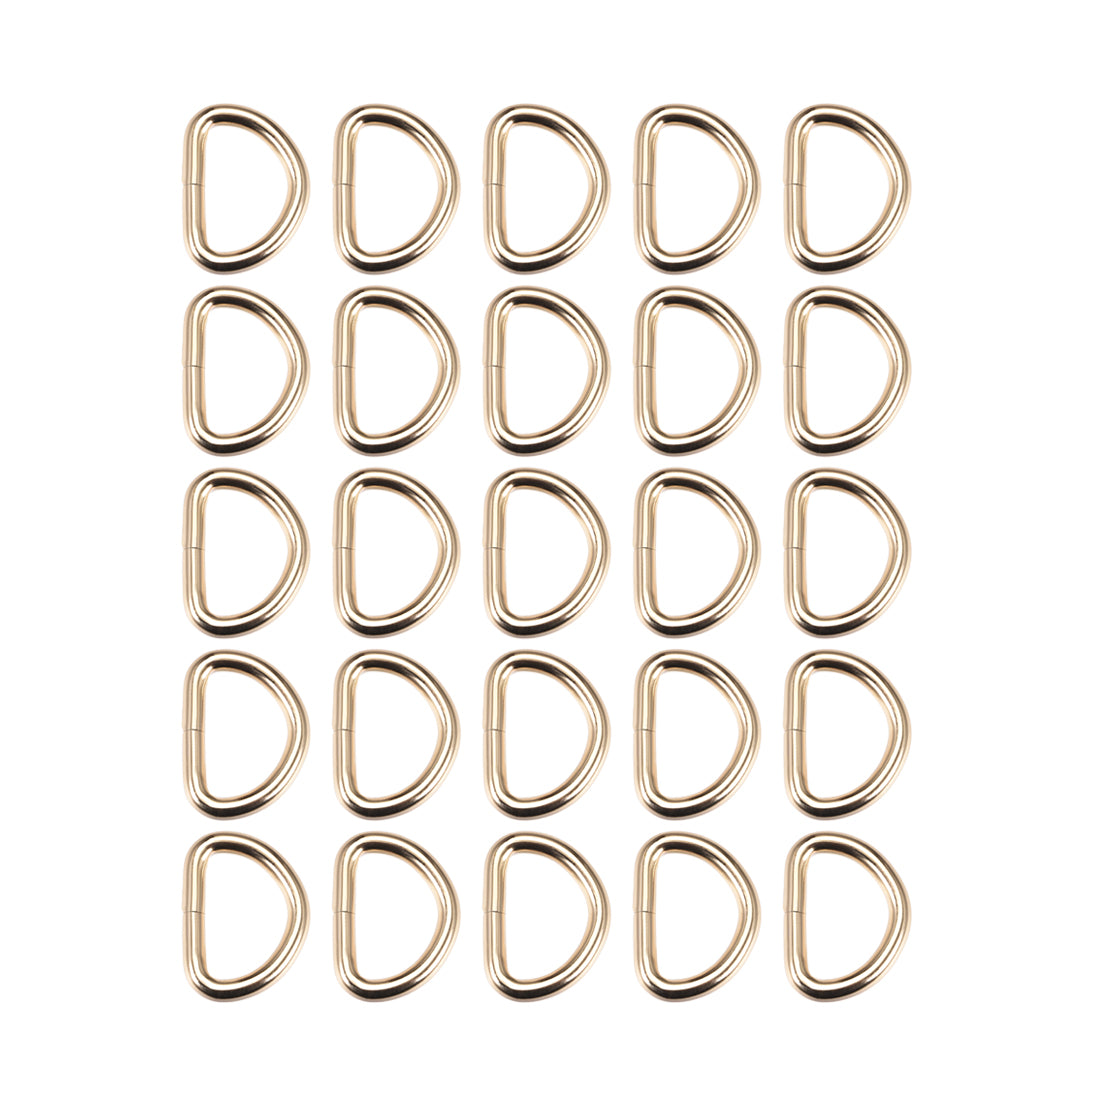 uxcell Uxcell 25 Pcs D Ring Buckle 1 Inch Metal Semi-Circular D-Rings Gold Tone for Hardware Bags Belts Craft DIY Accessories